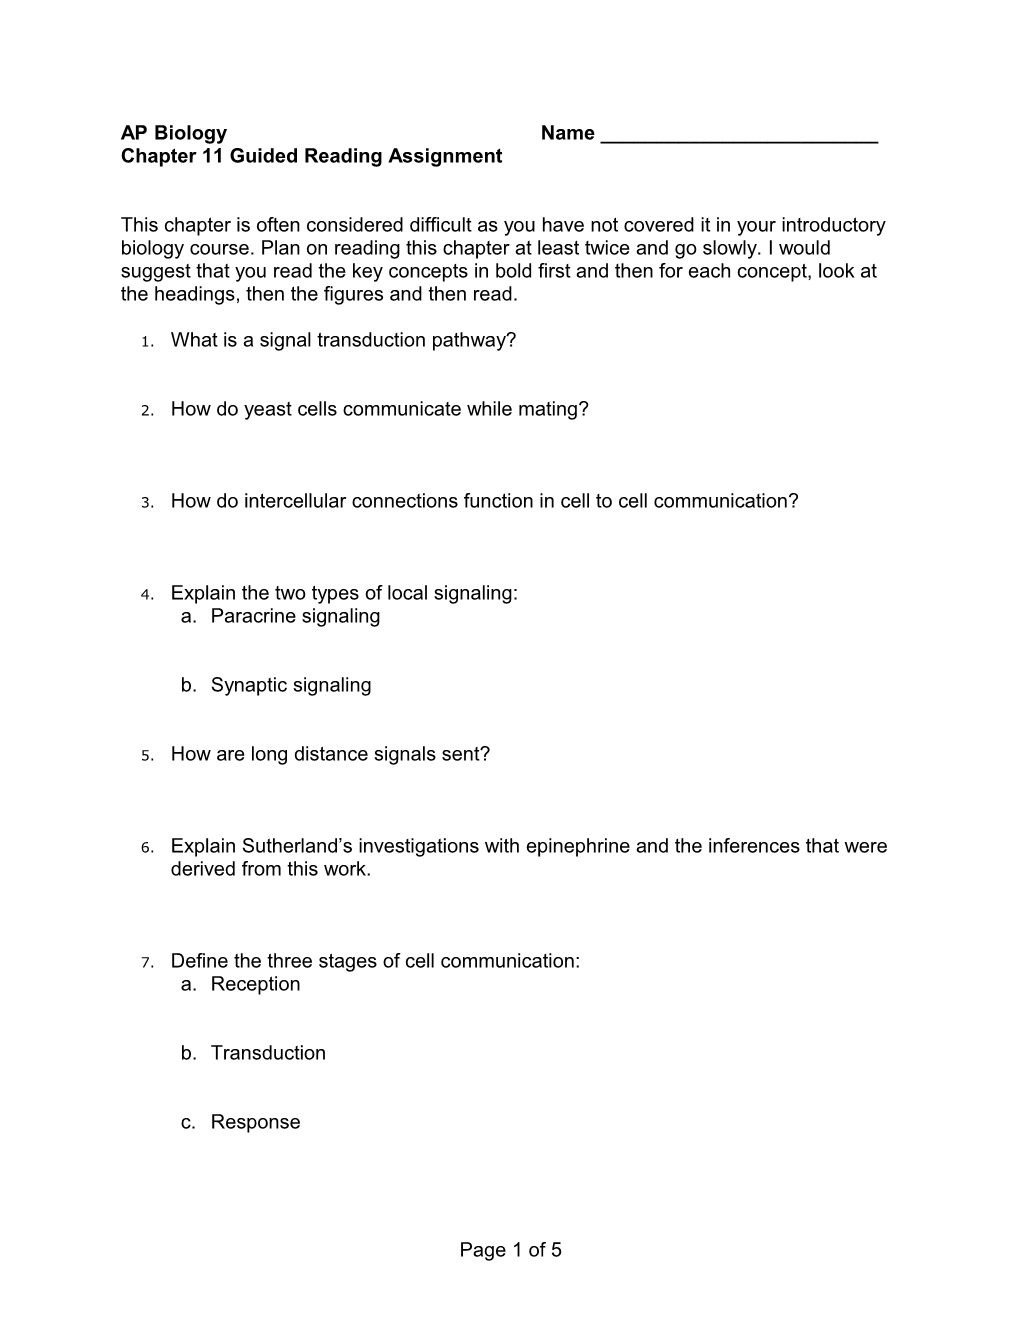 Chapter 11 Guided Reading Assignment